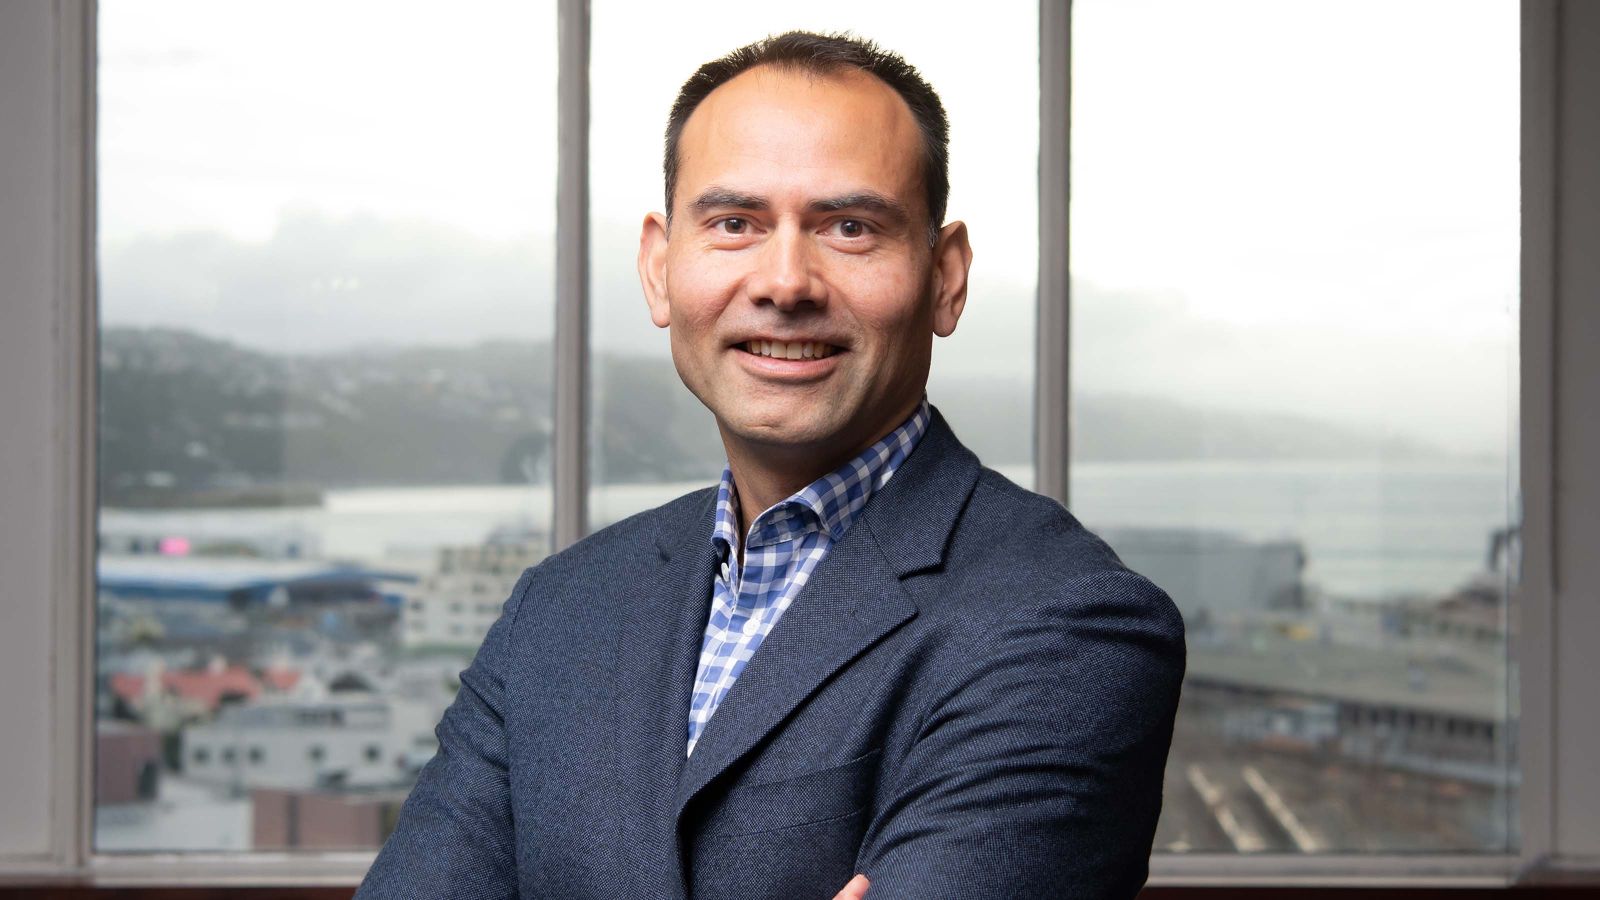 An Executive MBA student poses for a photo with his arms crossed in front of a window overlooking Wellington Harbour.